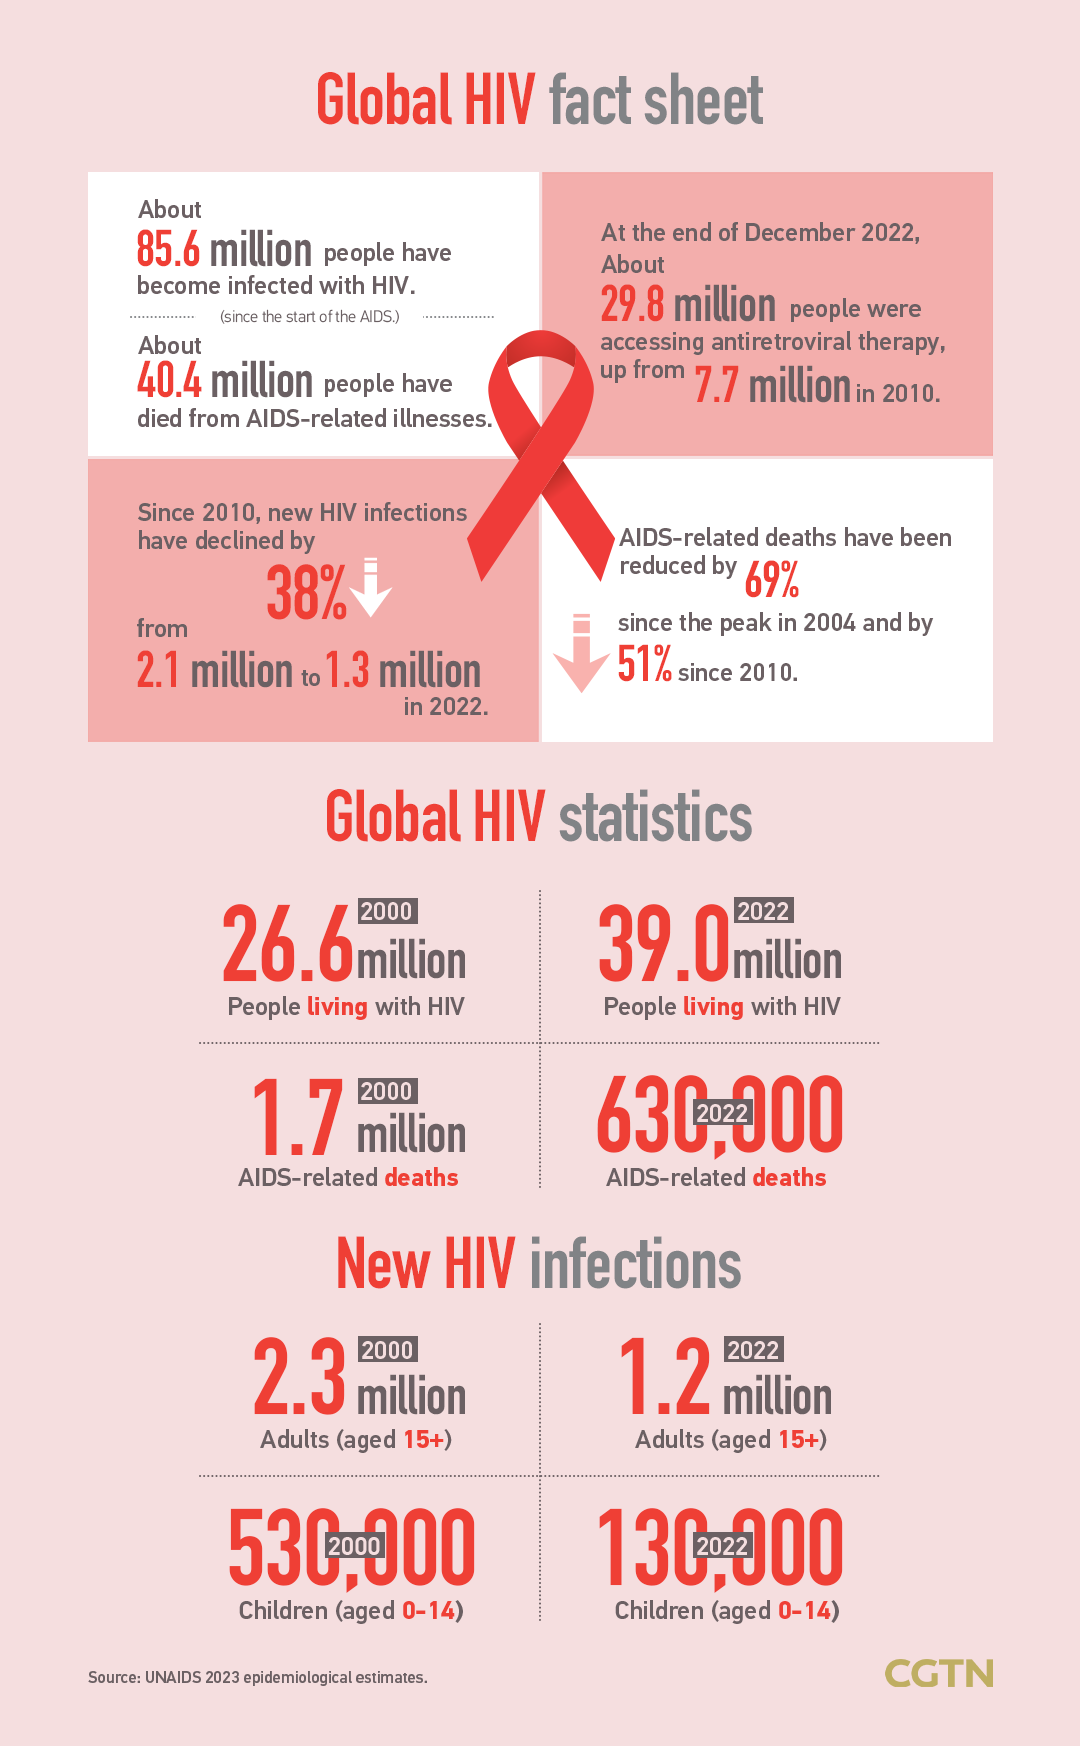 World AIDS Day: Communities lead the way in ending HIV by 2030